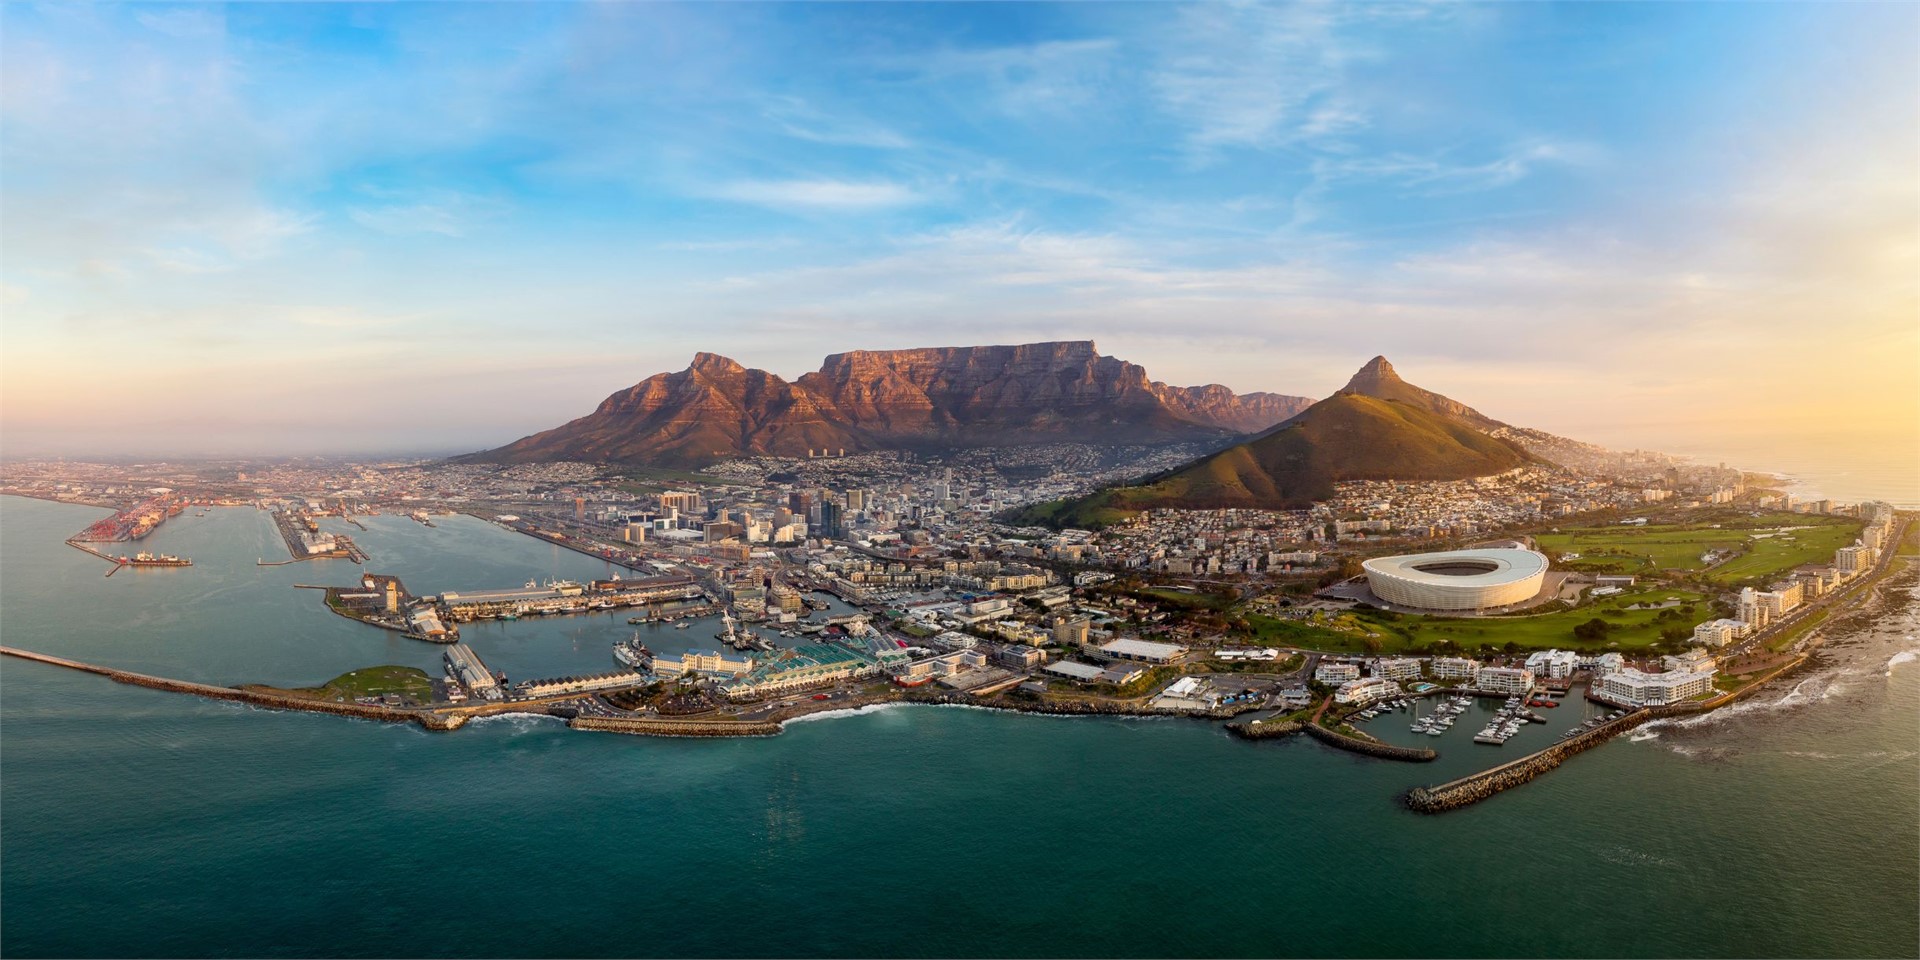 Hotels and accommodation in Cape Town, South Africa